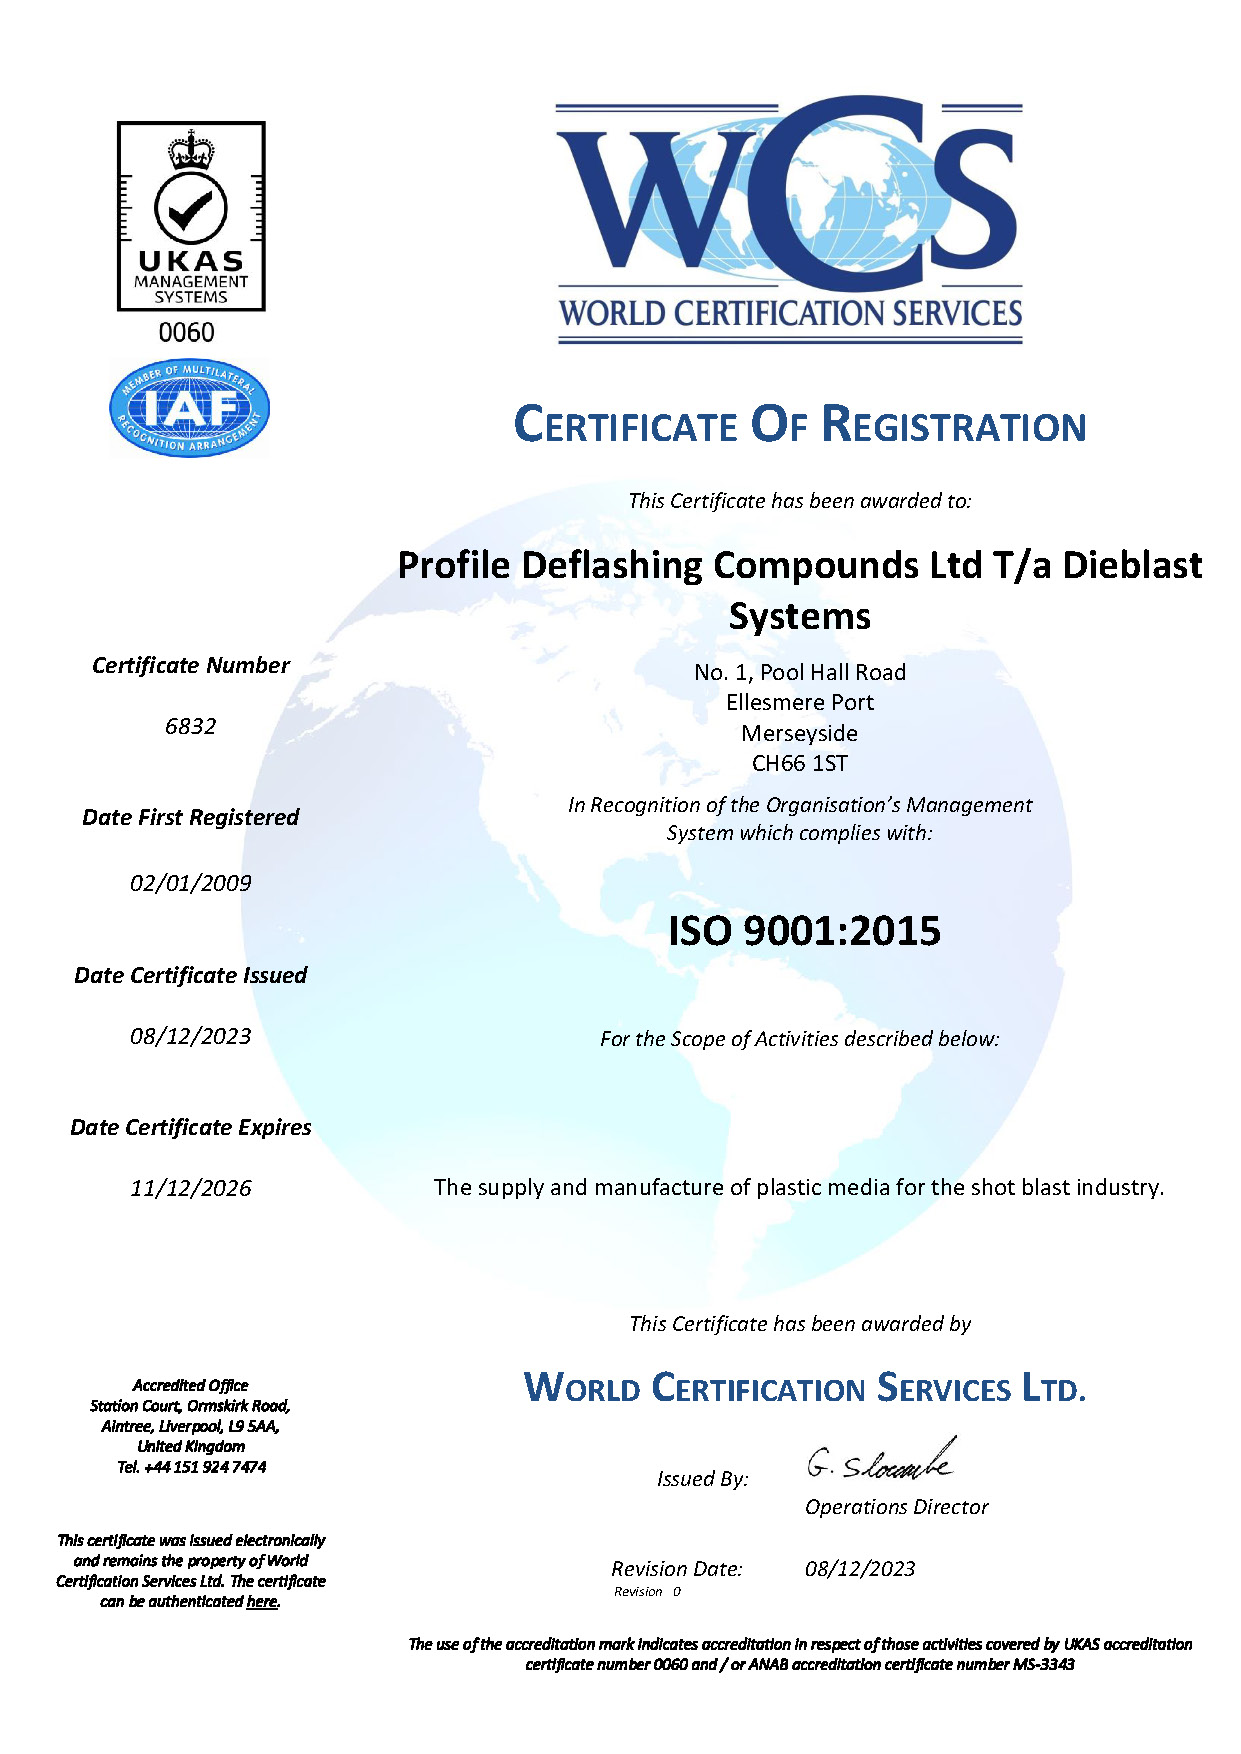 Certified according to DIN ISO 9001